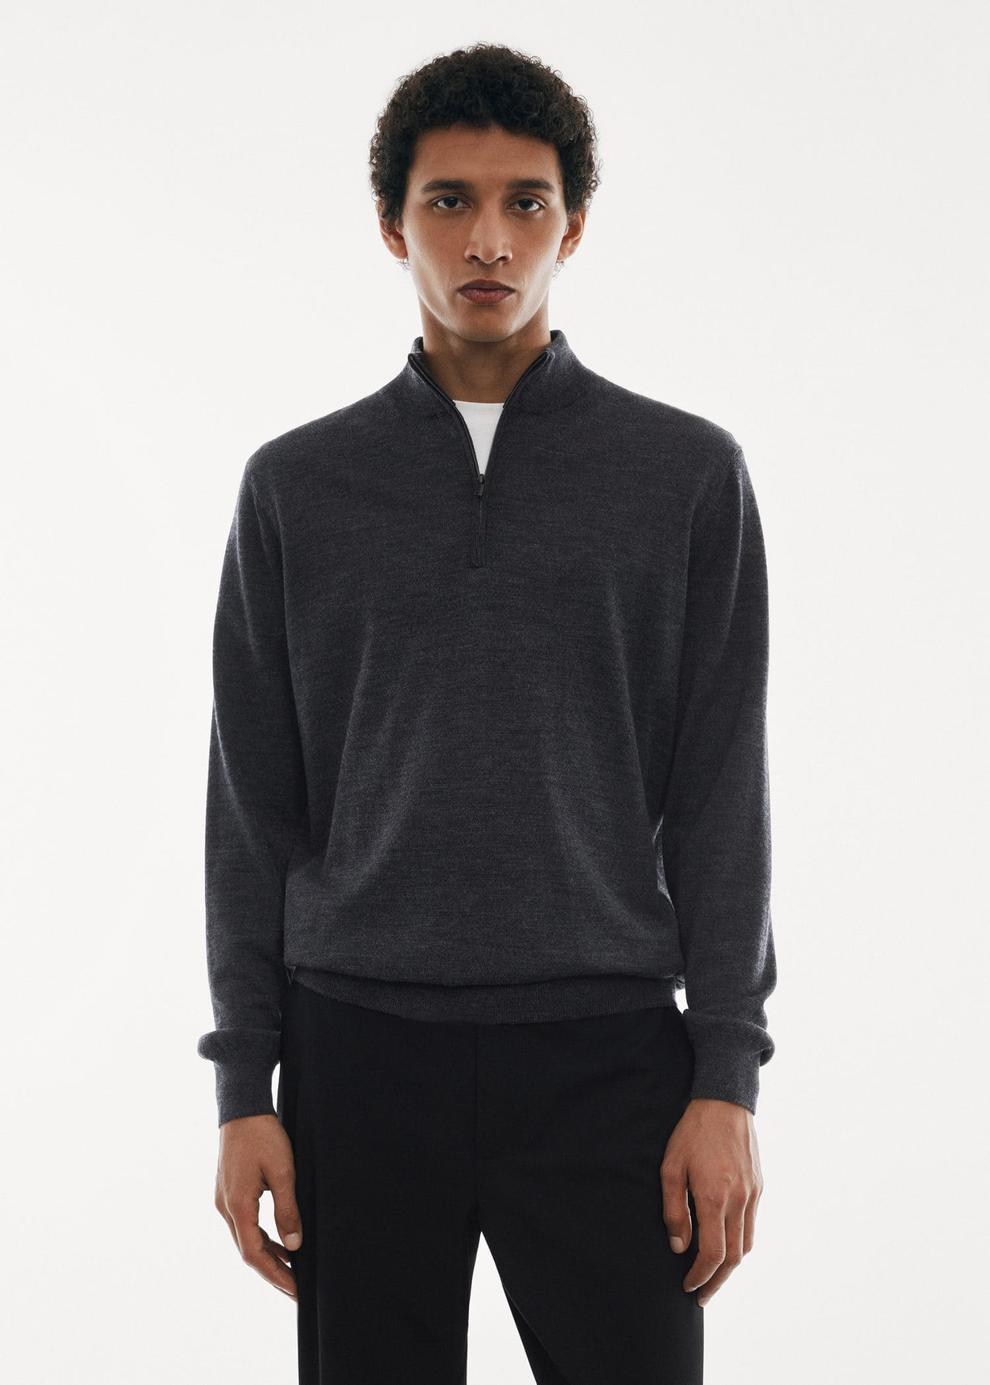 100% merino wool sweater with zip collar offers at S$ 89.9 in HE by Mango